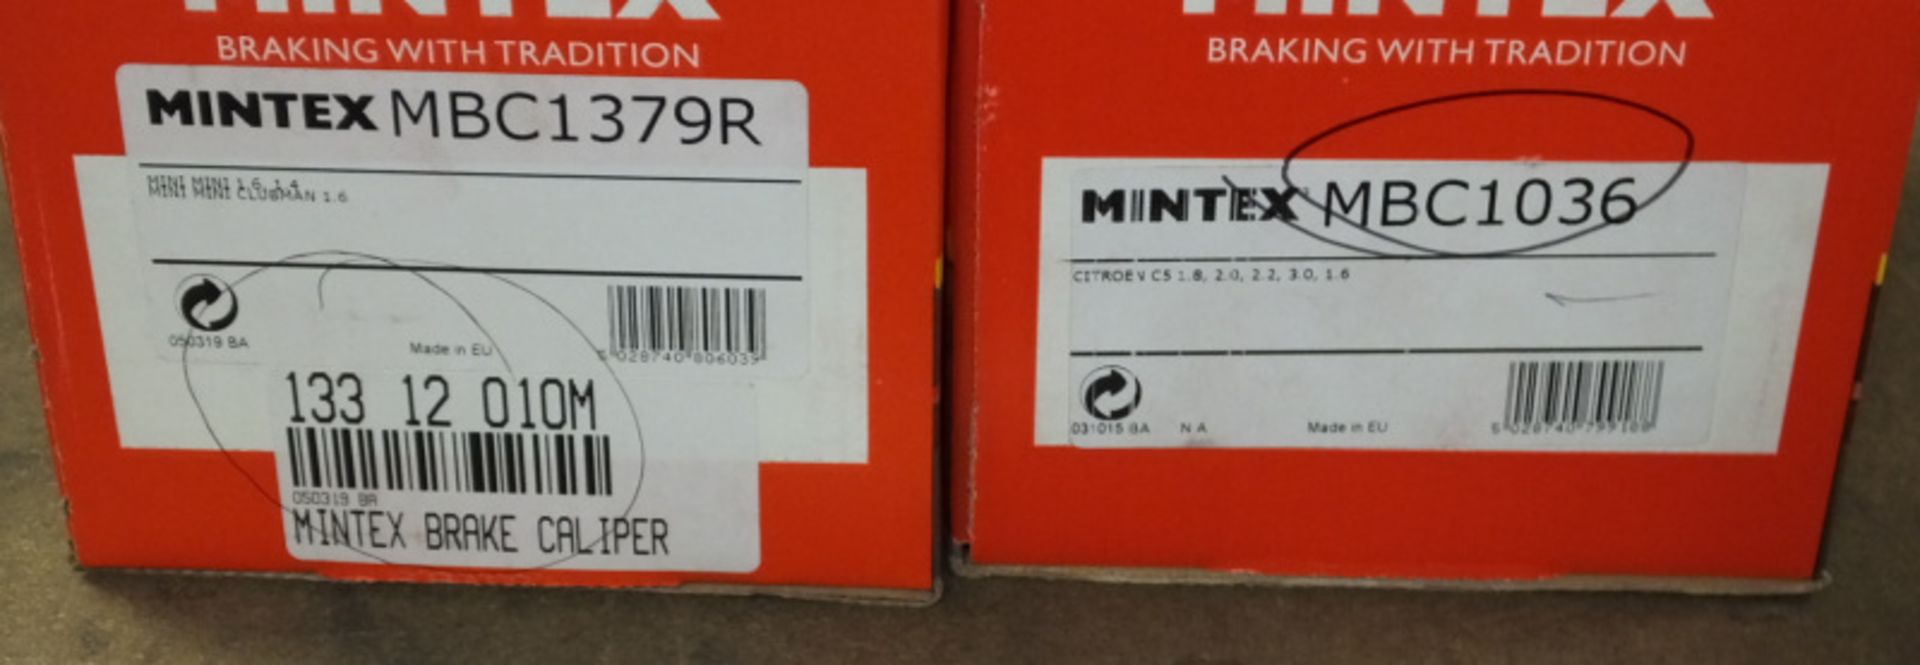 Mintex Brake Calipers - Please see pictures for examples of part numbers. - Image 3 of 3